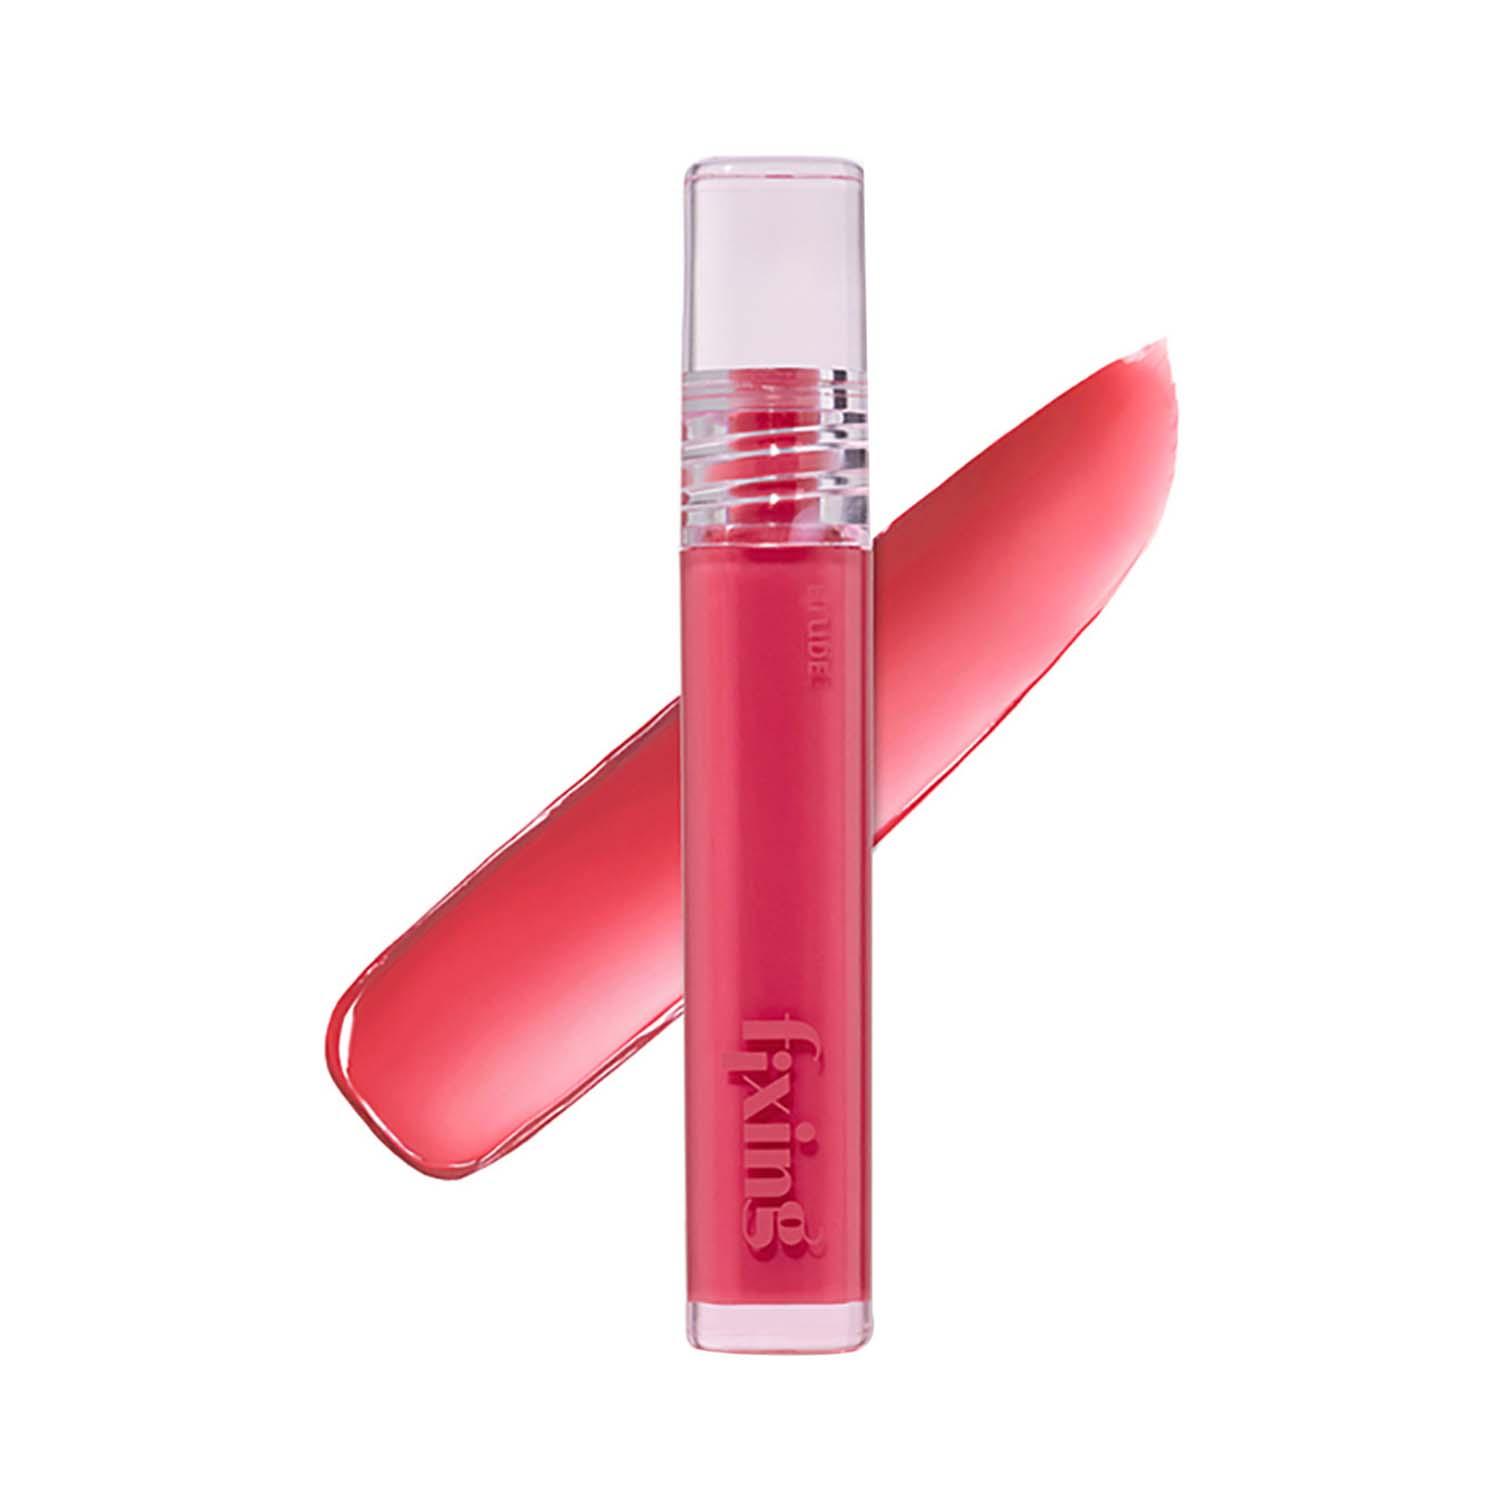 ETUDE HOUSE | ETUDE HOUSE Glow Fixing Tint - 04 Chilling Red (3.8 g)